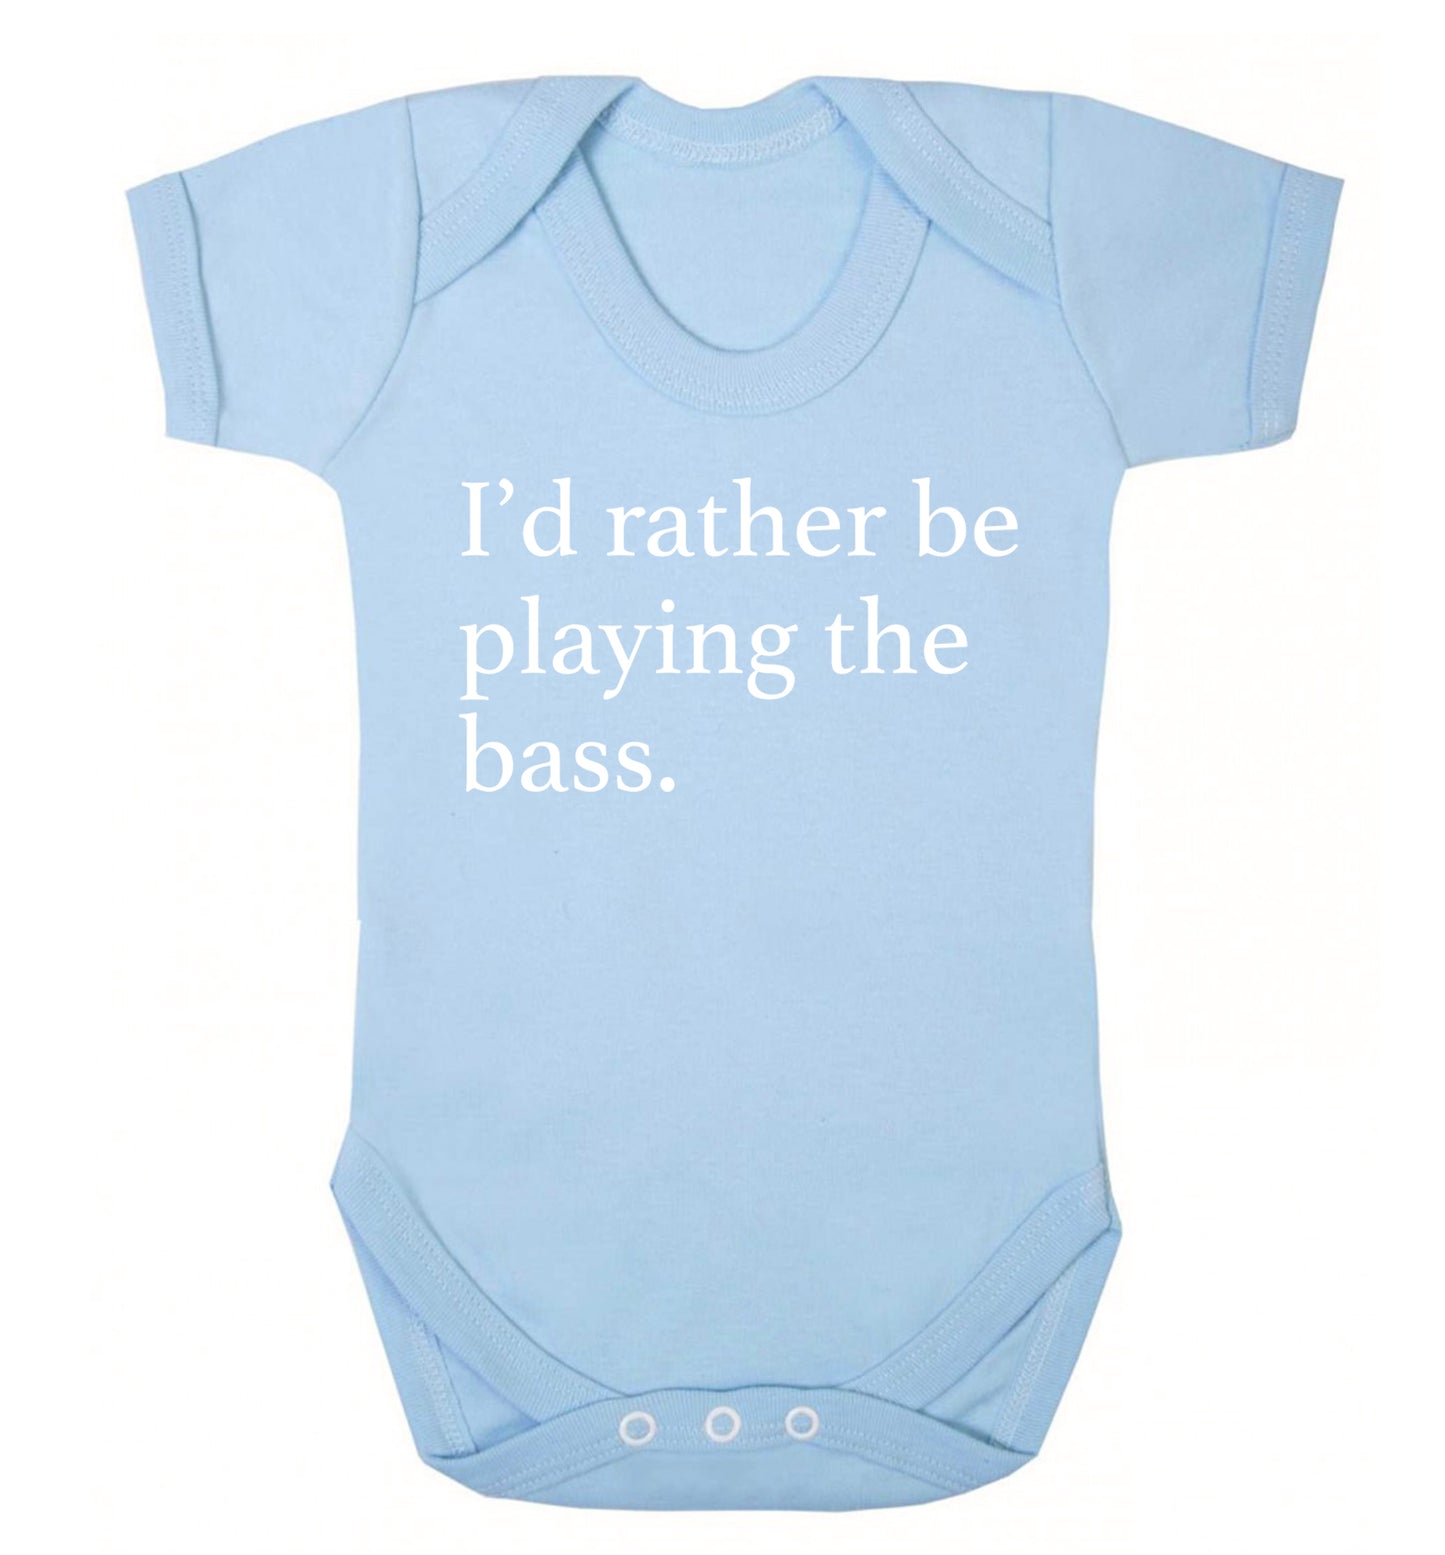 I'd rather by playing the bass Baby Vest pale blue 18-24 months